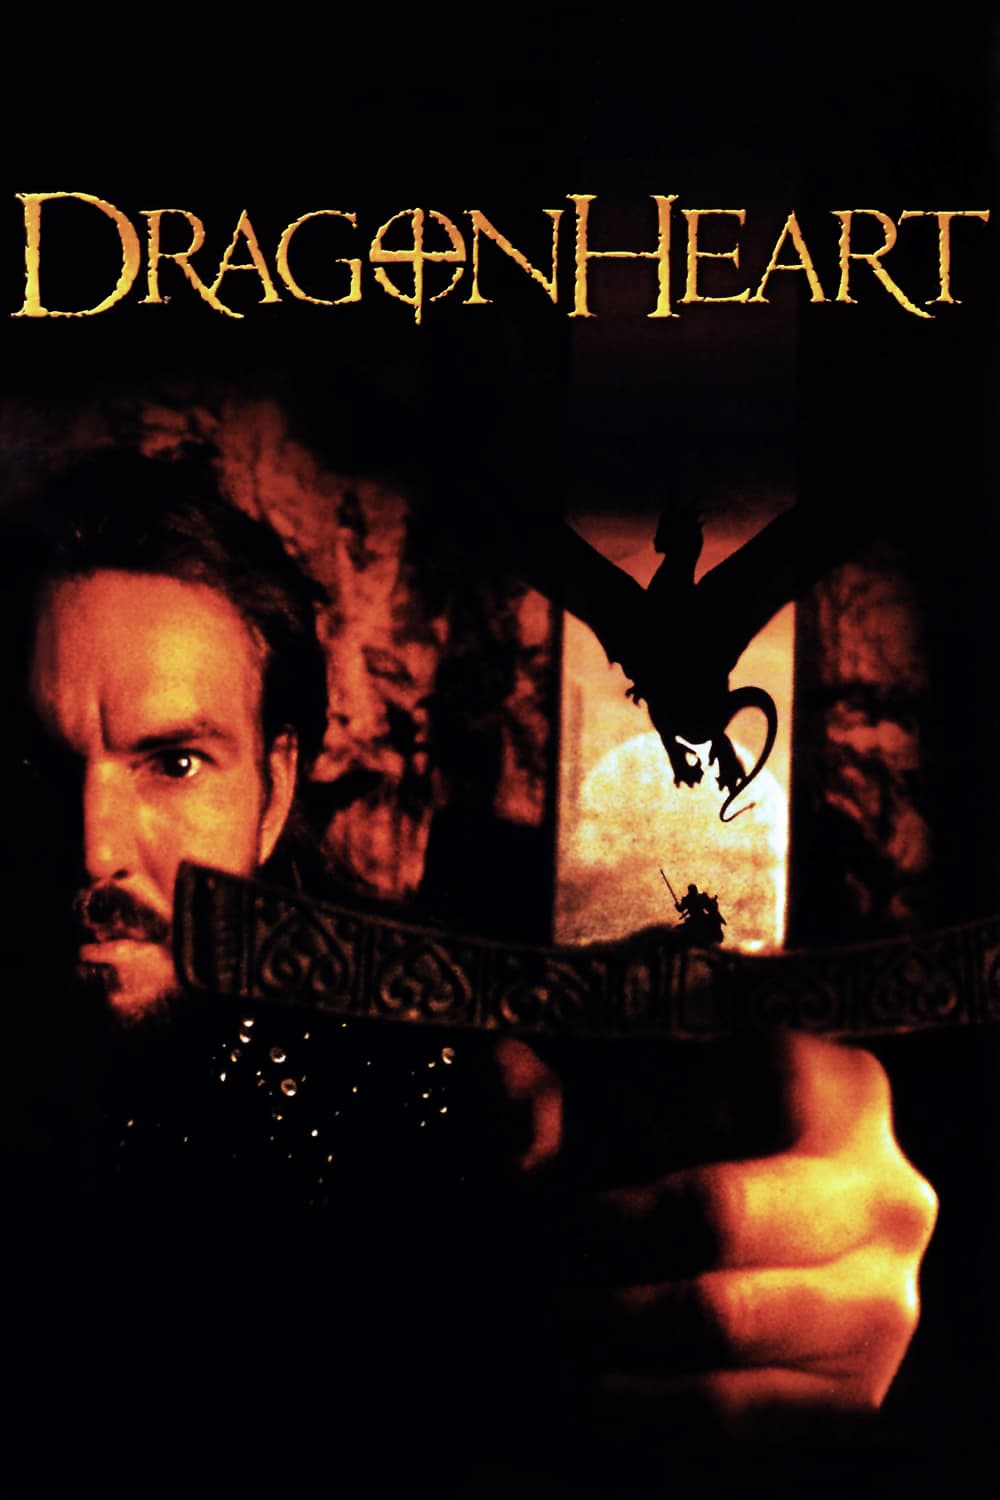 Poster for the movie "Dragonheart"